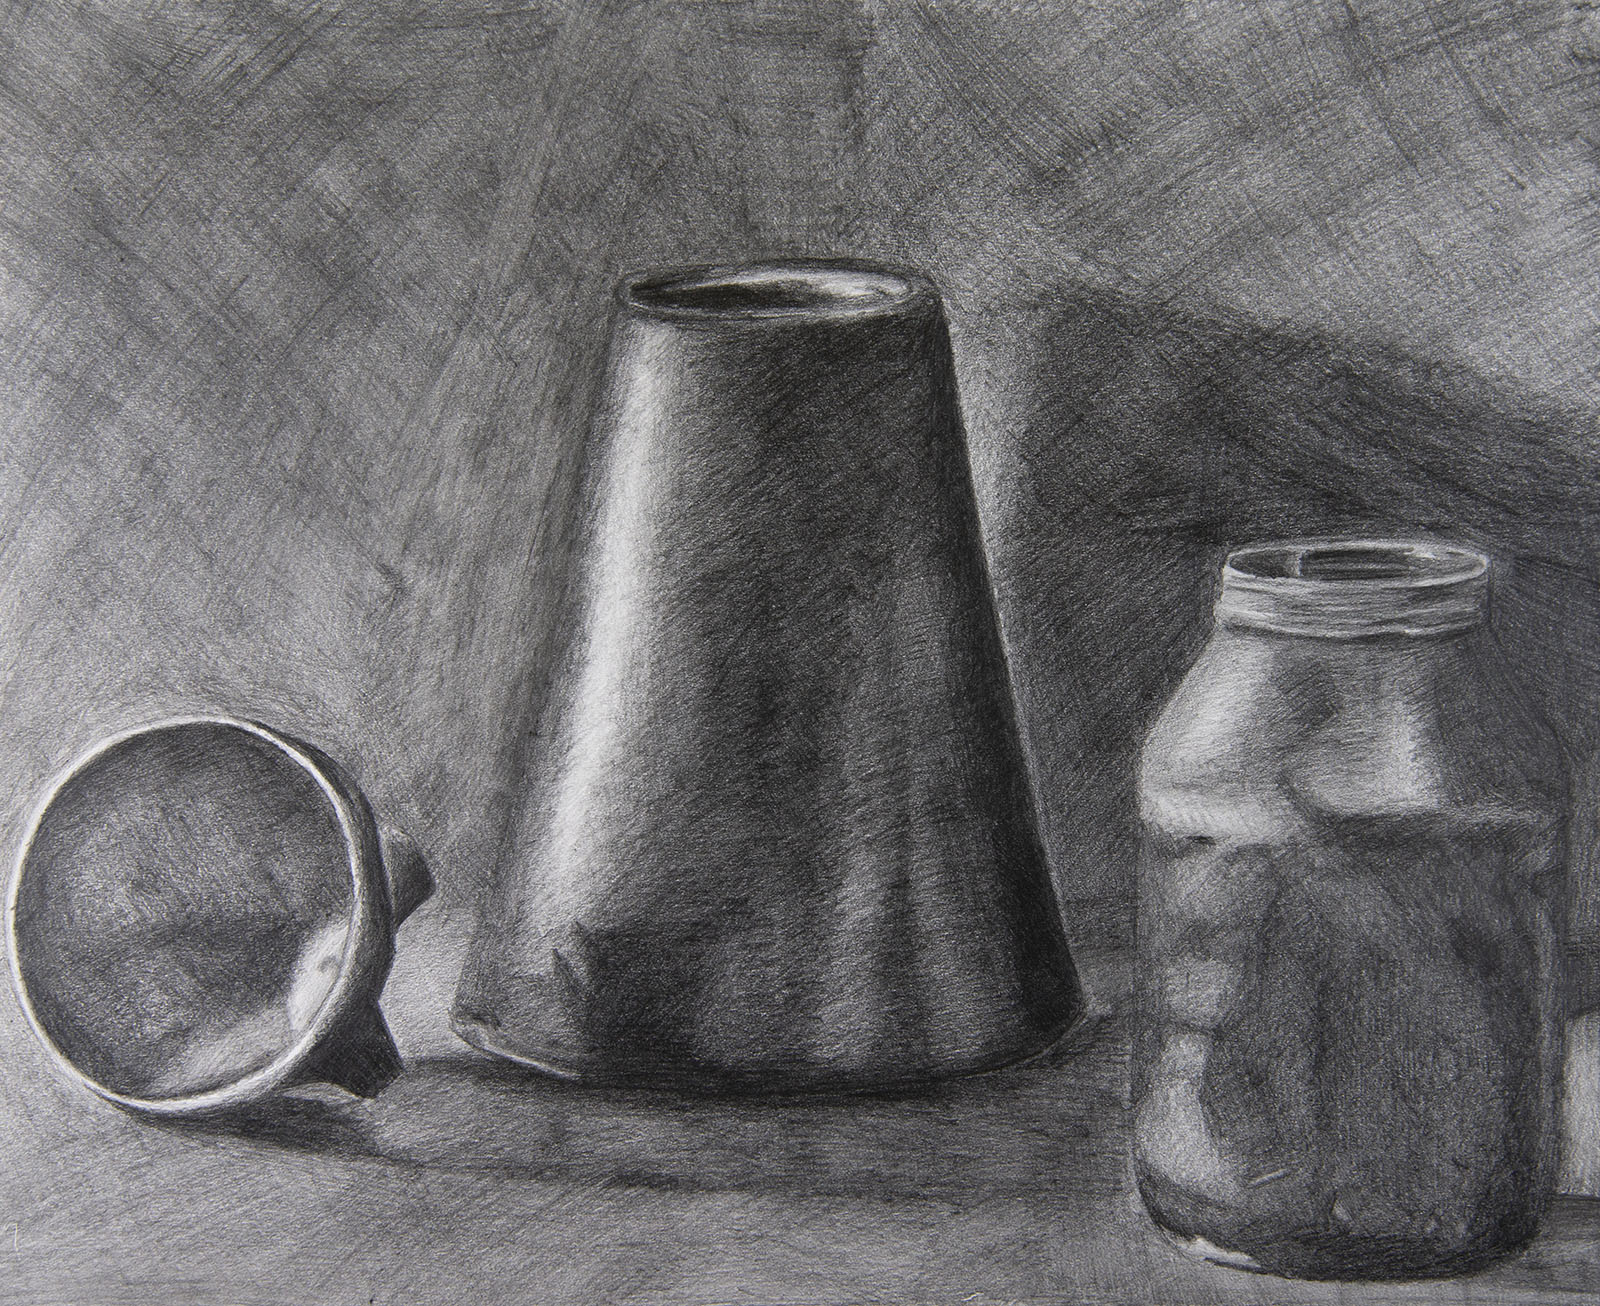 Sketching Project Topic 1: Still Life